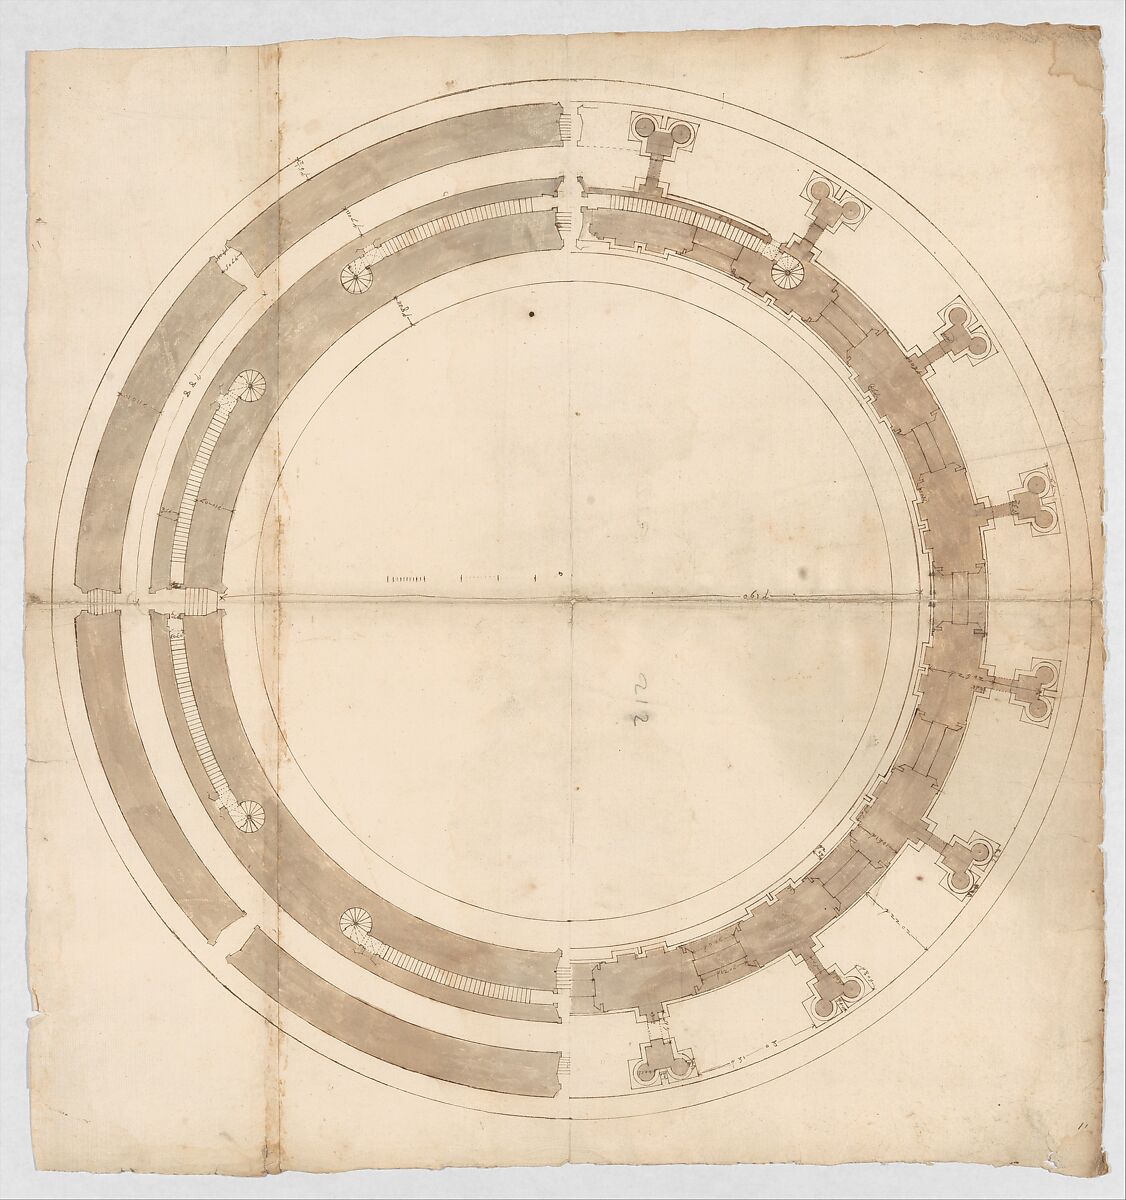 St. Peter's, drum, plans at two levels (recto) blank (verso), Drawn by Anonymous, French, 16th century, Dark brown ink, black chalk, and incised lines 